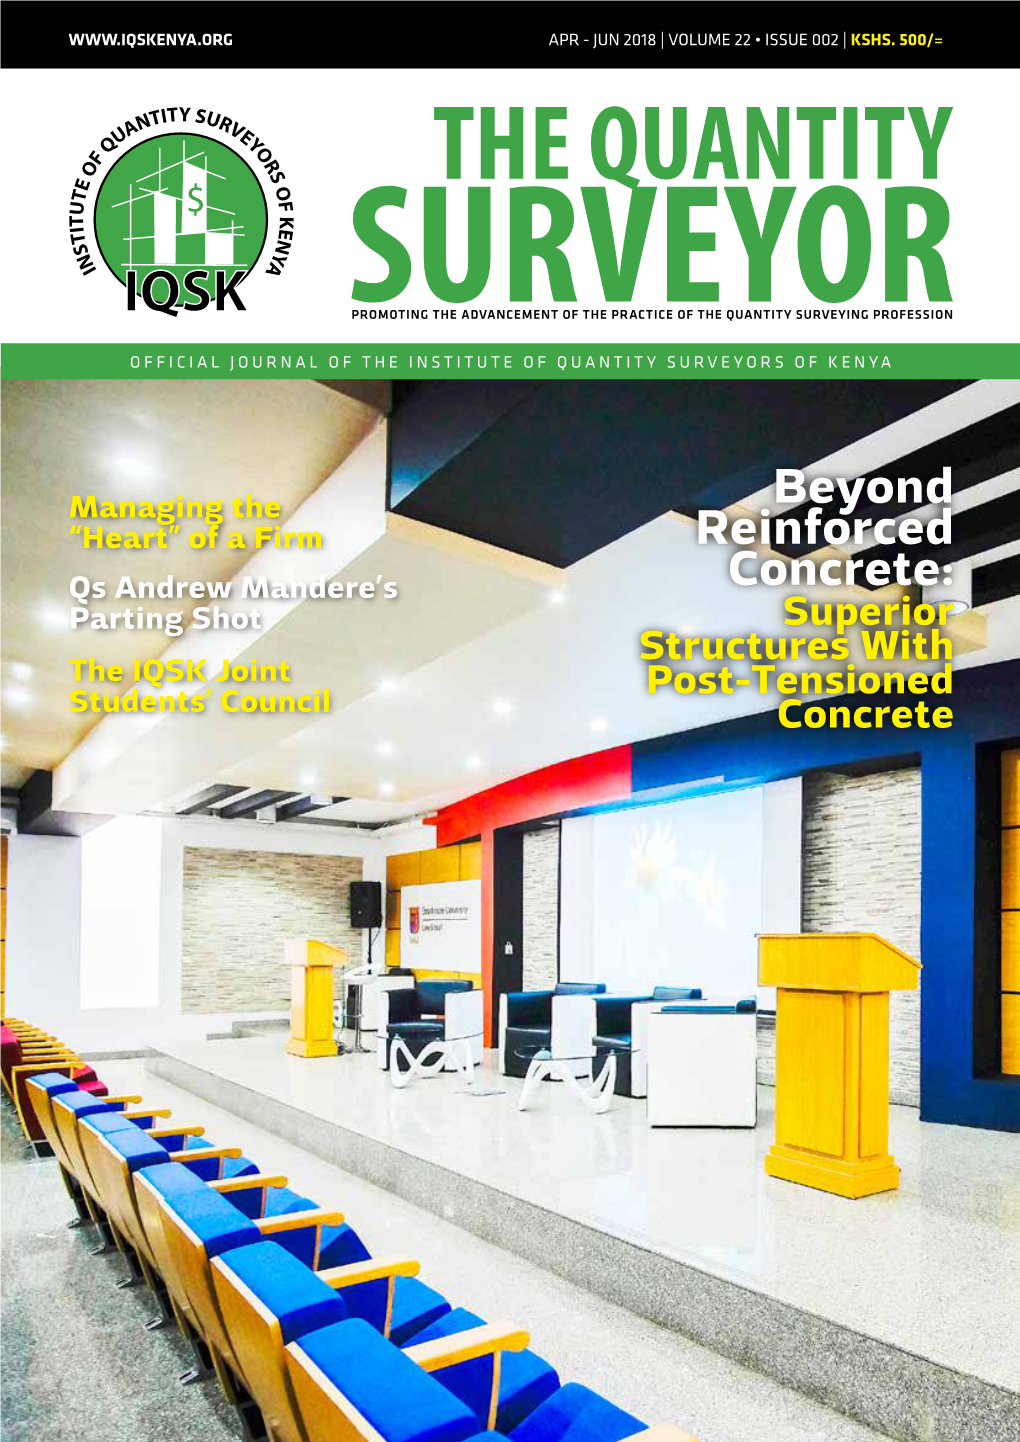 Beyond Reinforced Concrete: Superior Structures with Post-Tensioned 14 Concrete Opinion: Sponsors Essential Skills of the Future Quantity Surveyor 17 Student Corner